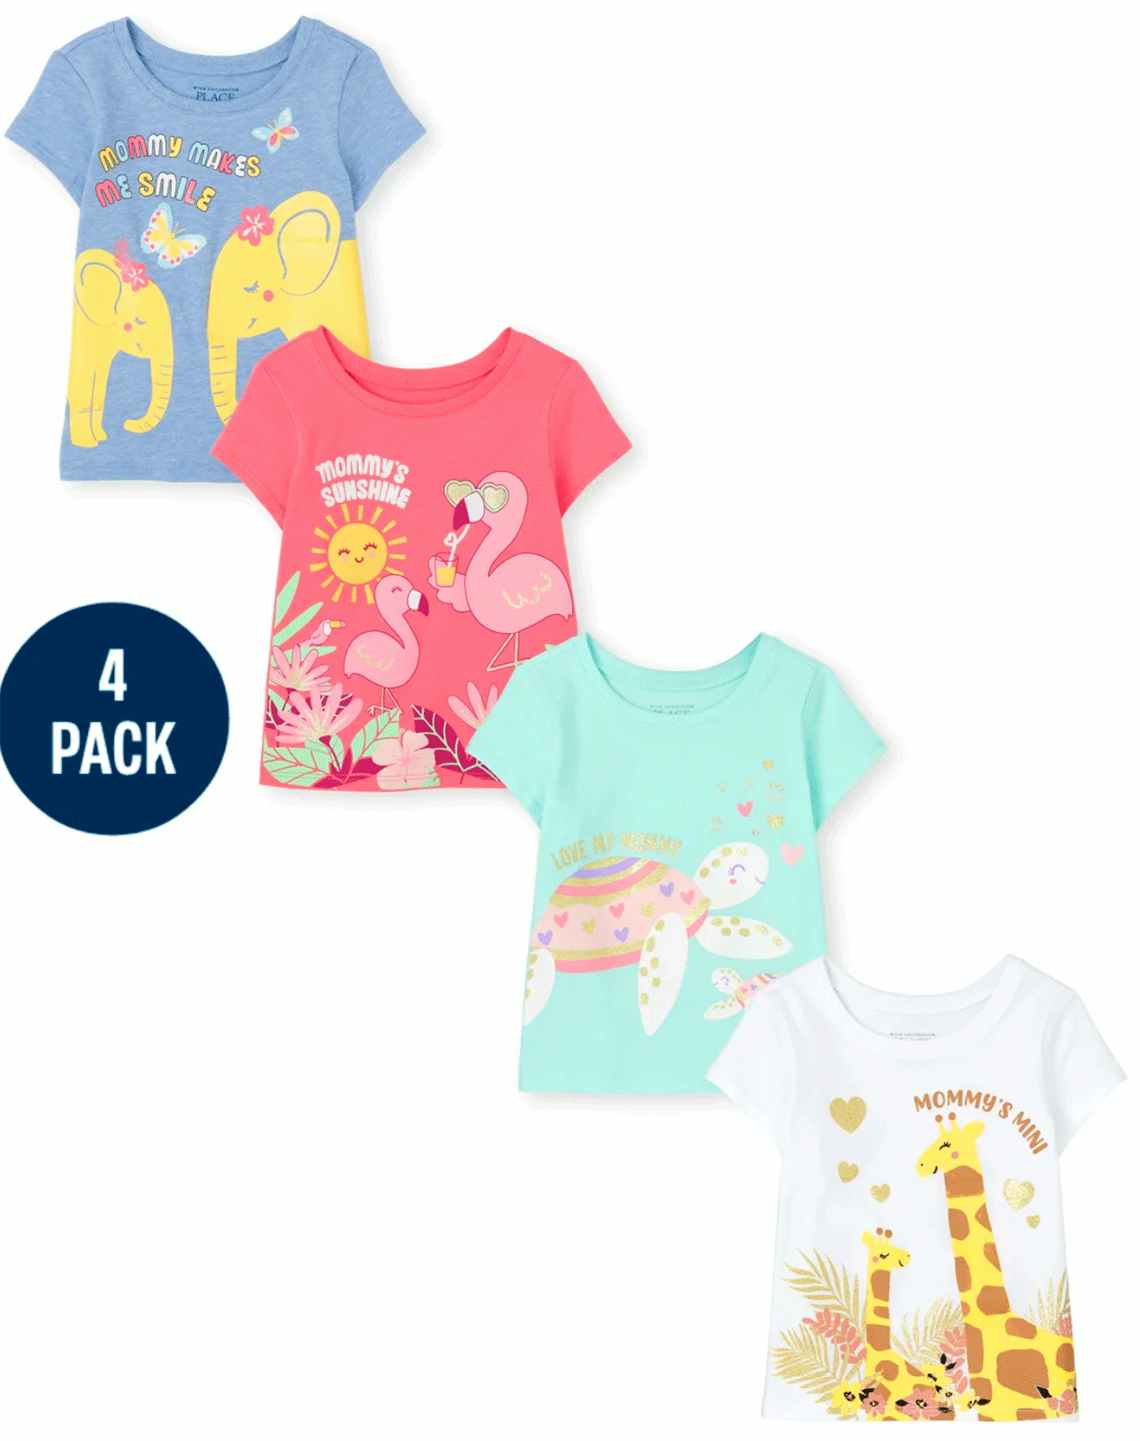 childrens-place-graphic-tees-2021-2